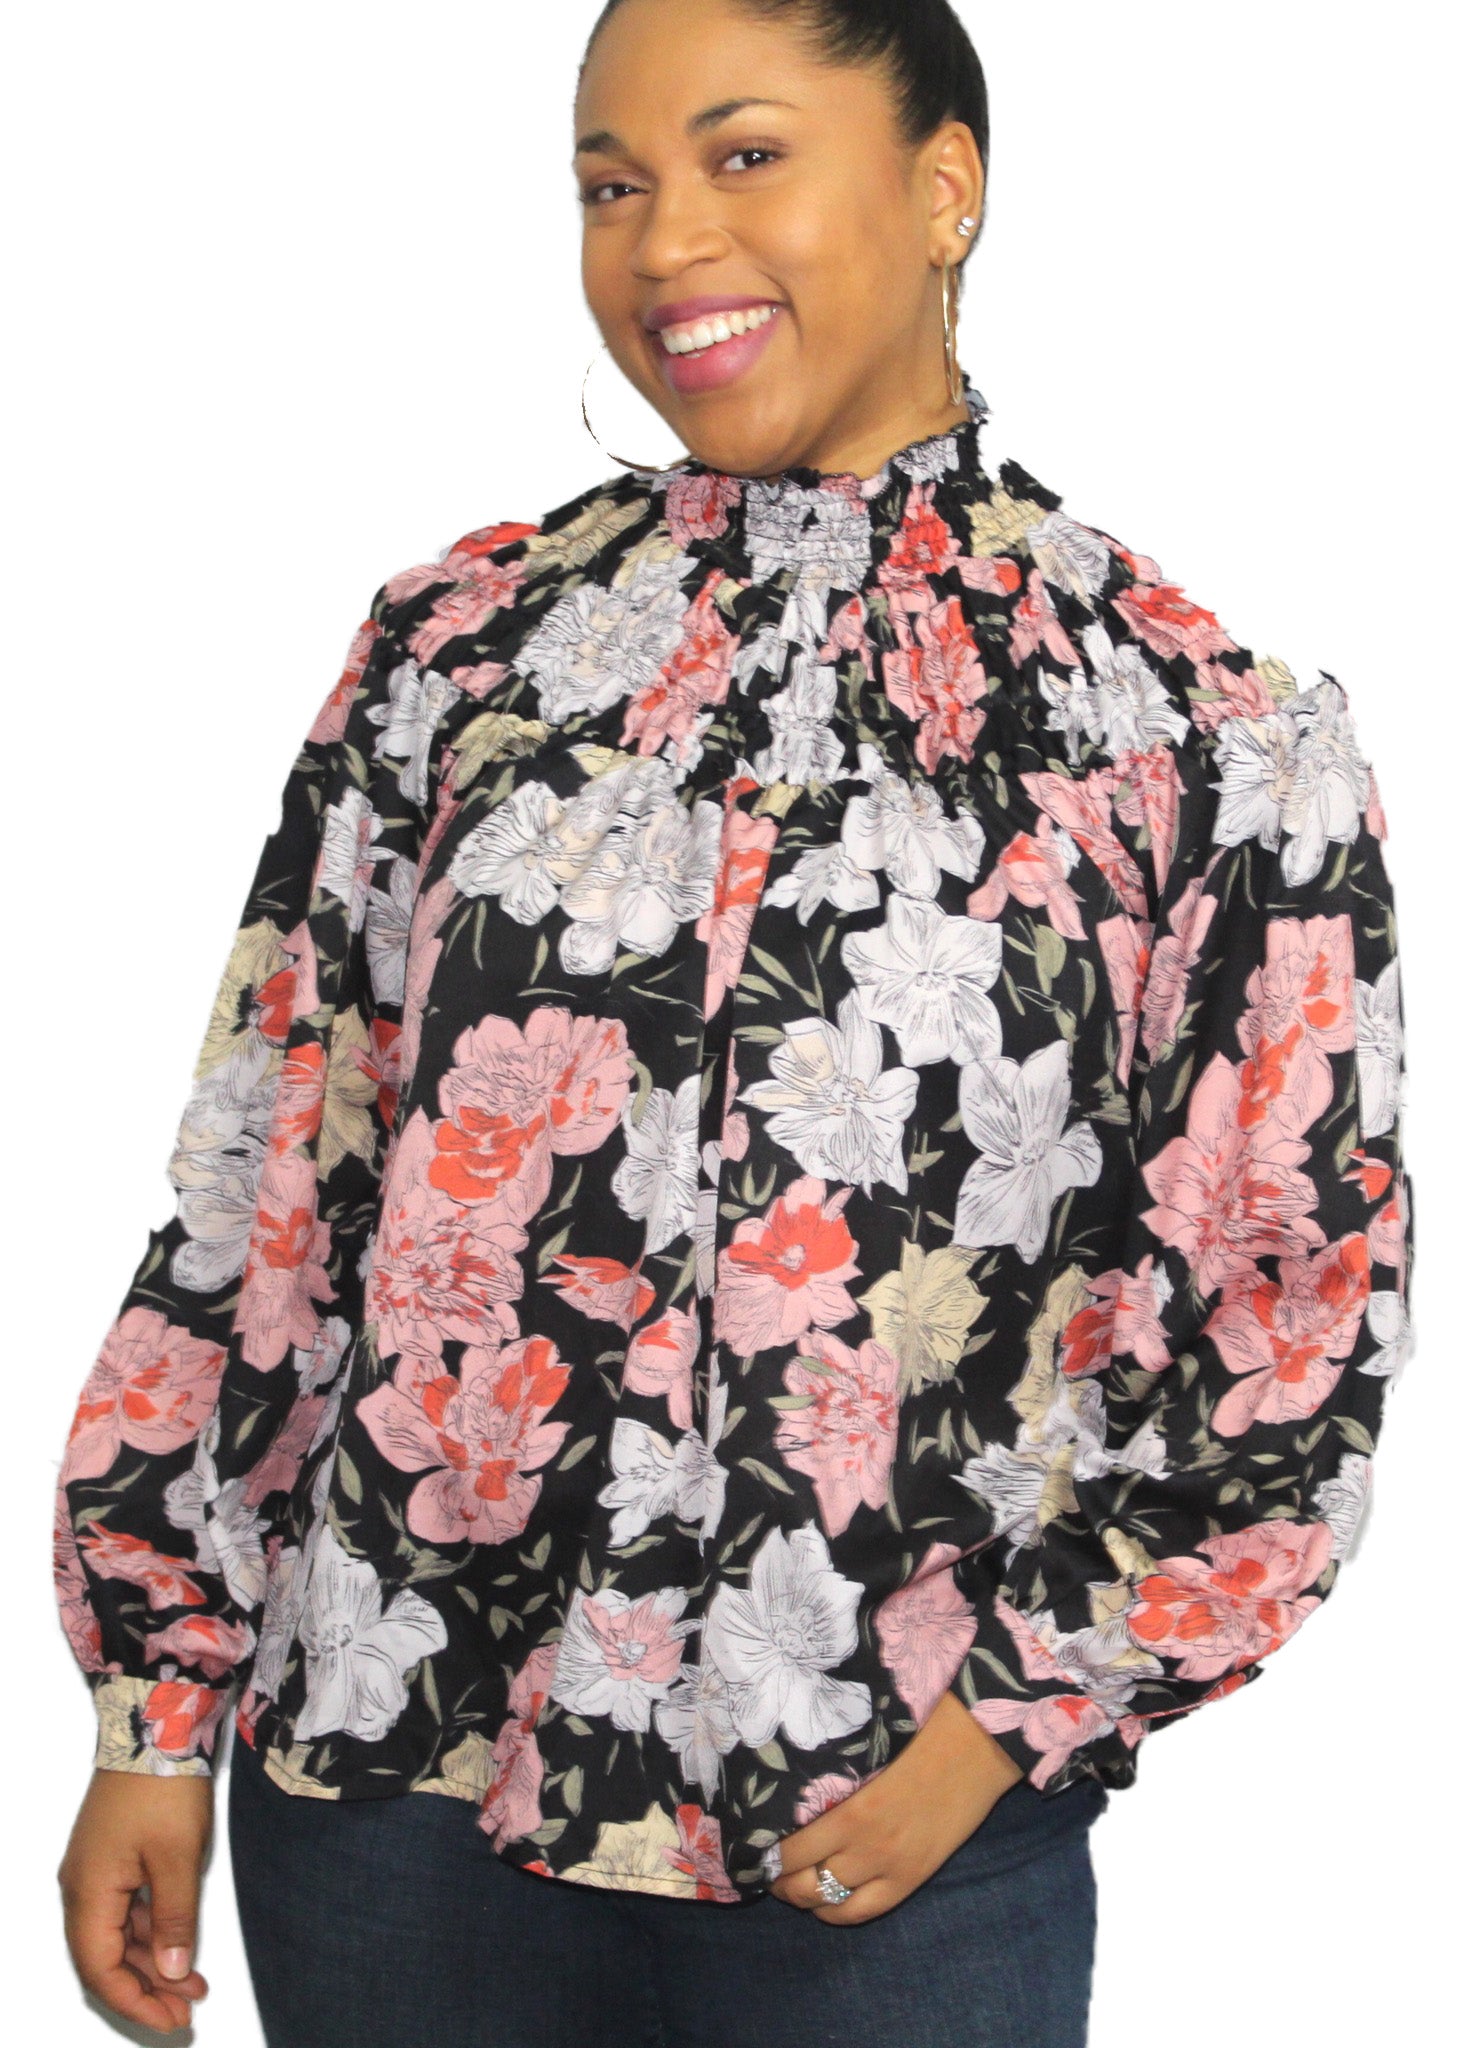 HIGH NECK RUCHED FLORAL PRINT BLOUSE